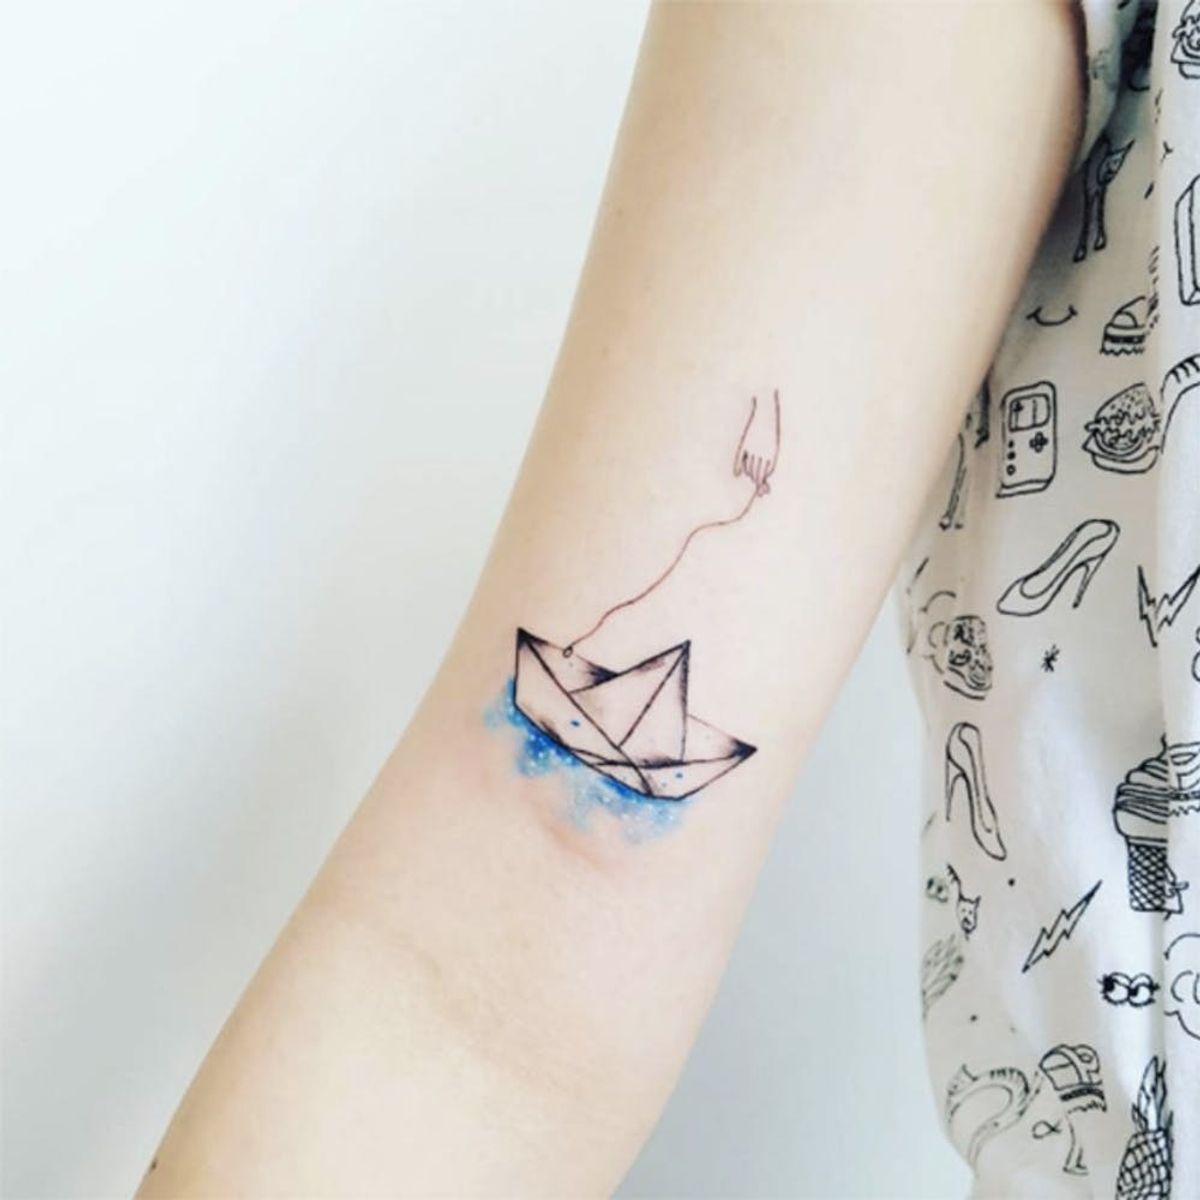 40 Small Tattoo Ideas to Copy Now